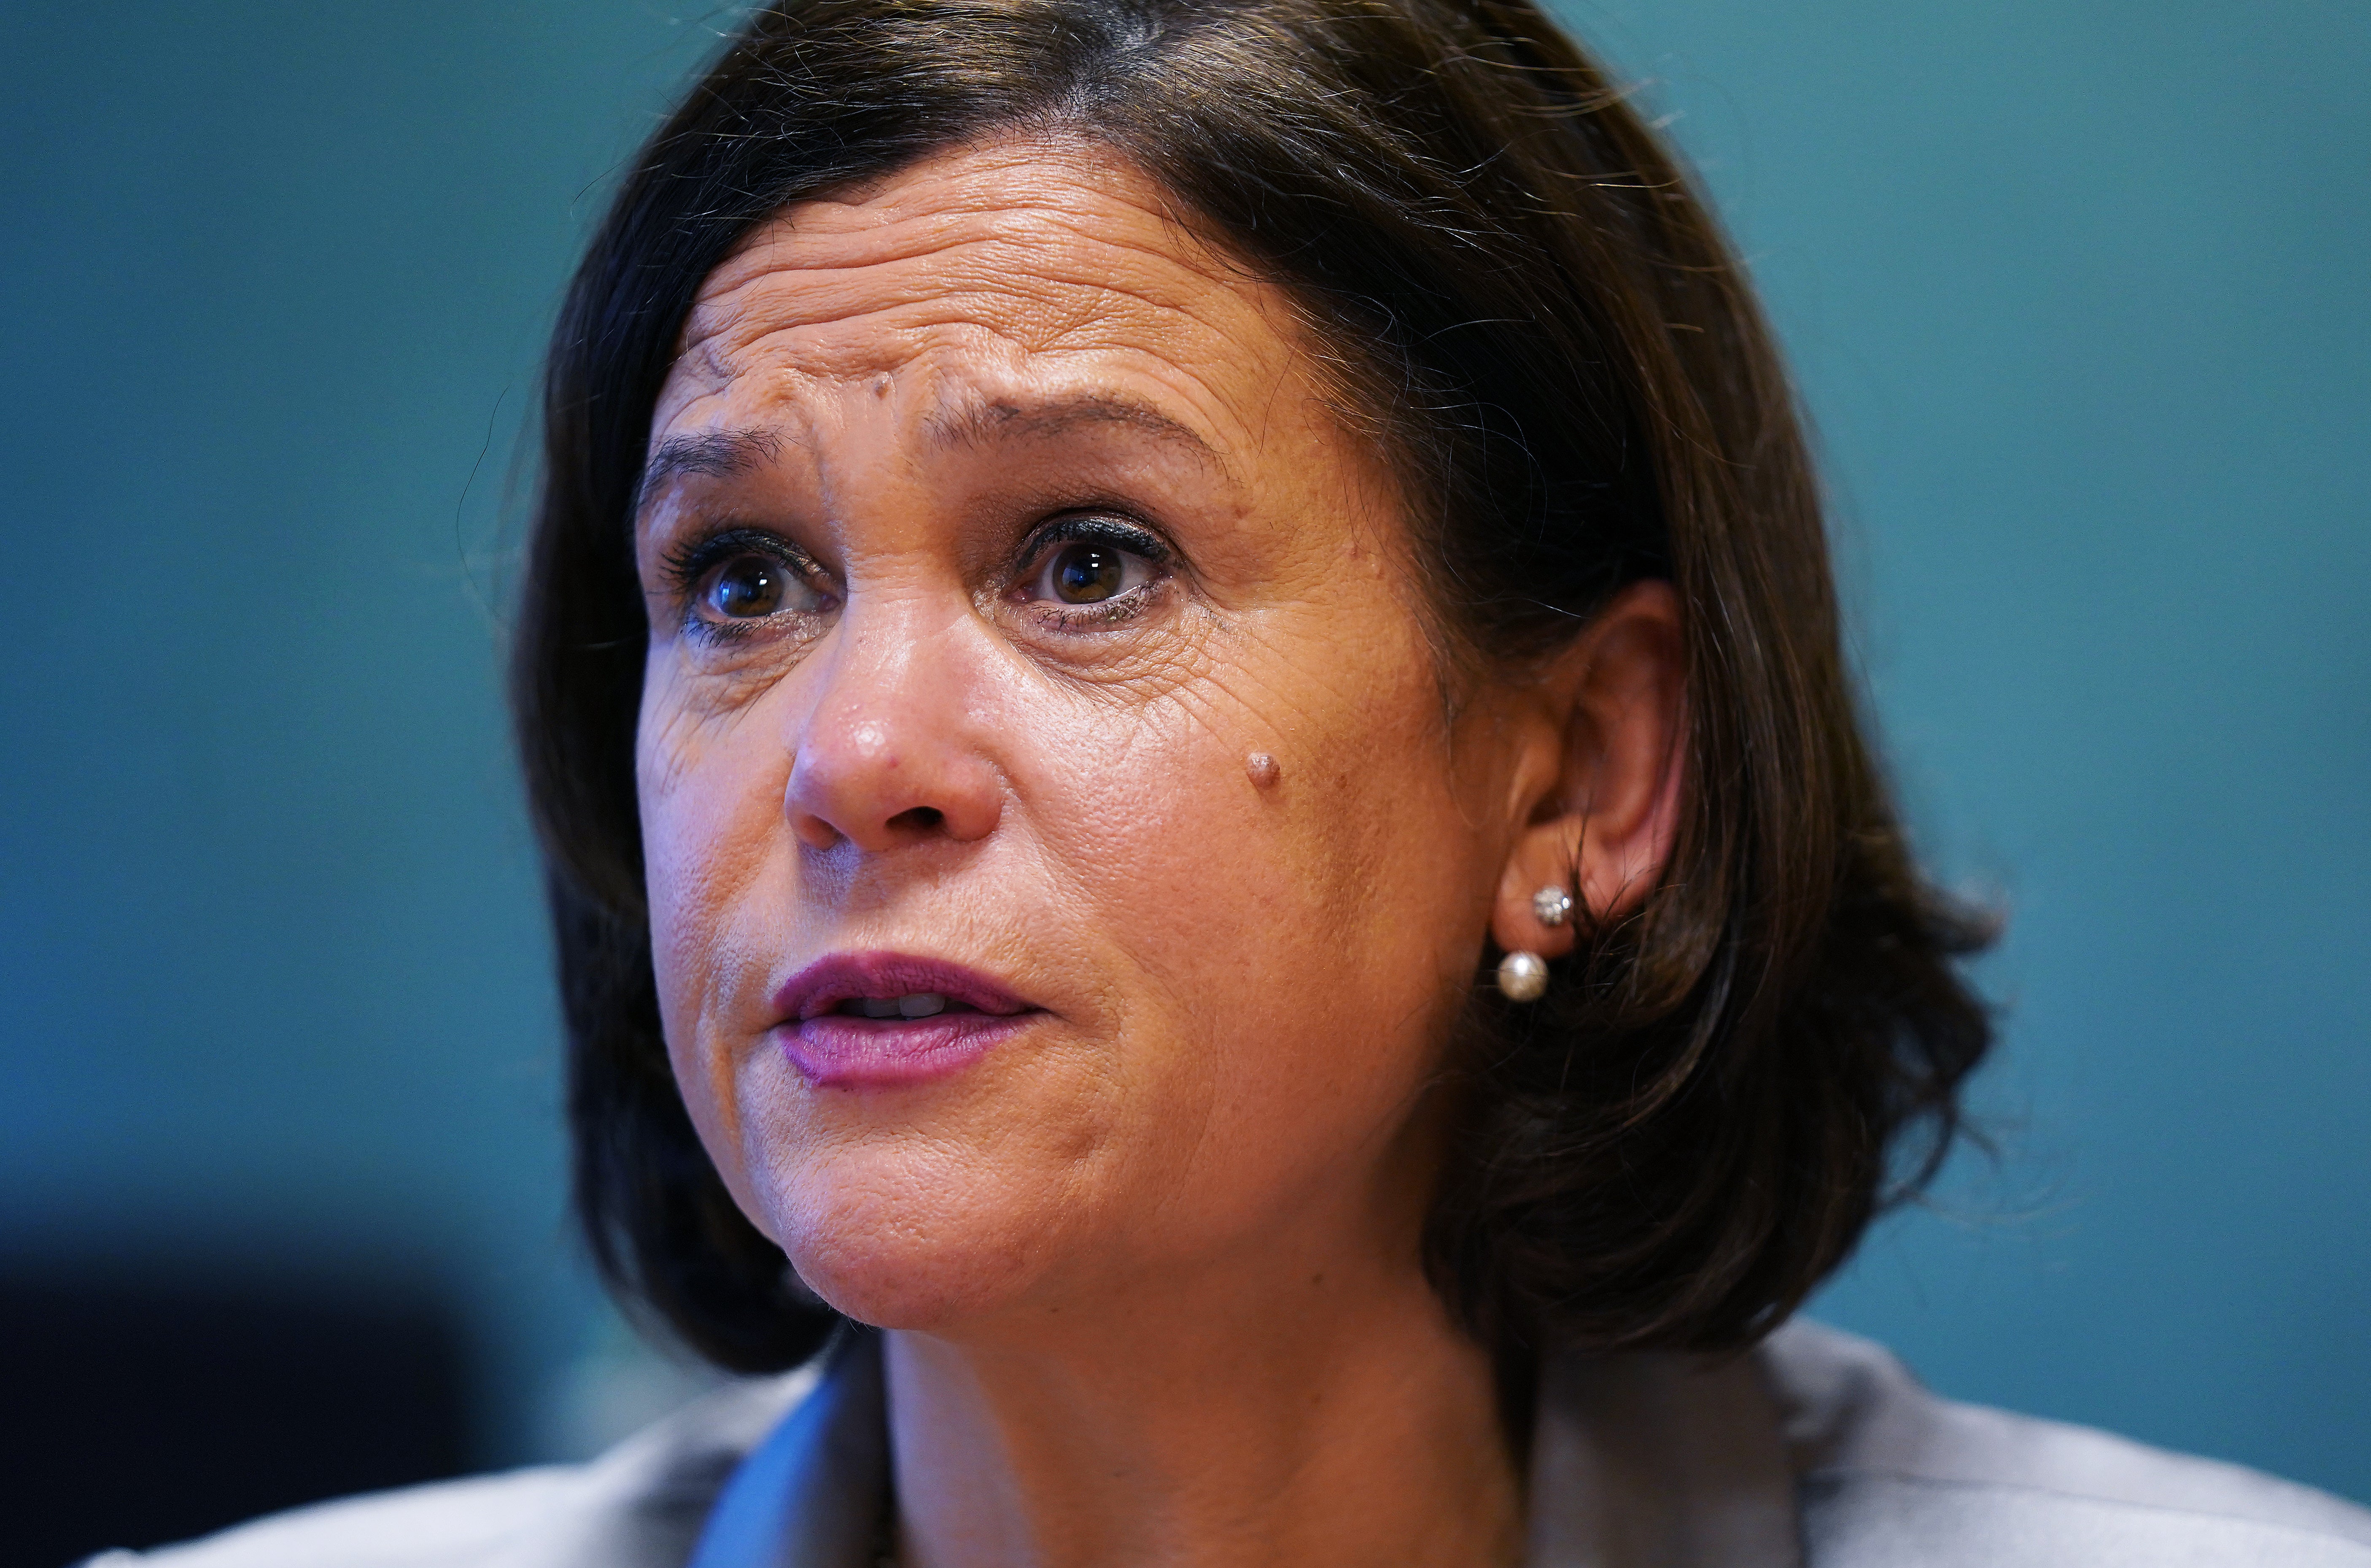 Sinn Fein leader Mary Lou McDonald was accused of not contacting Violet-Anne Wynne after the birth of her daughter (Brian Lawless/PA)